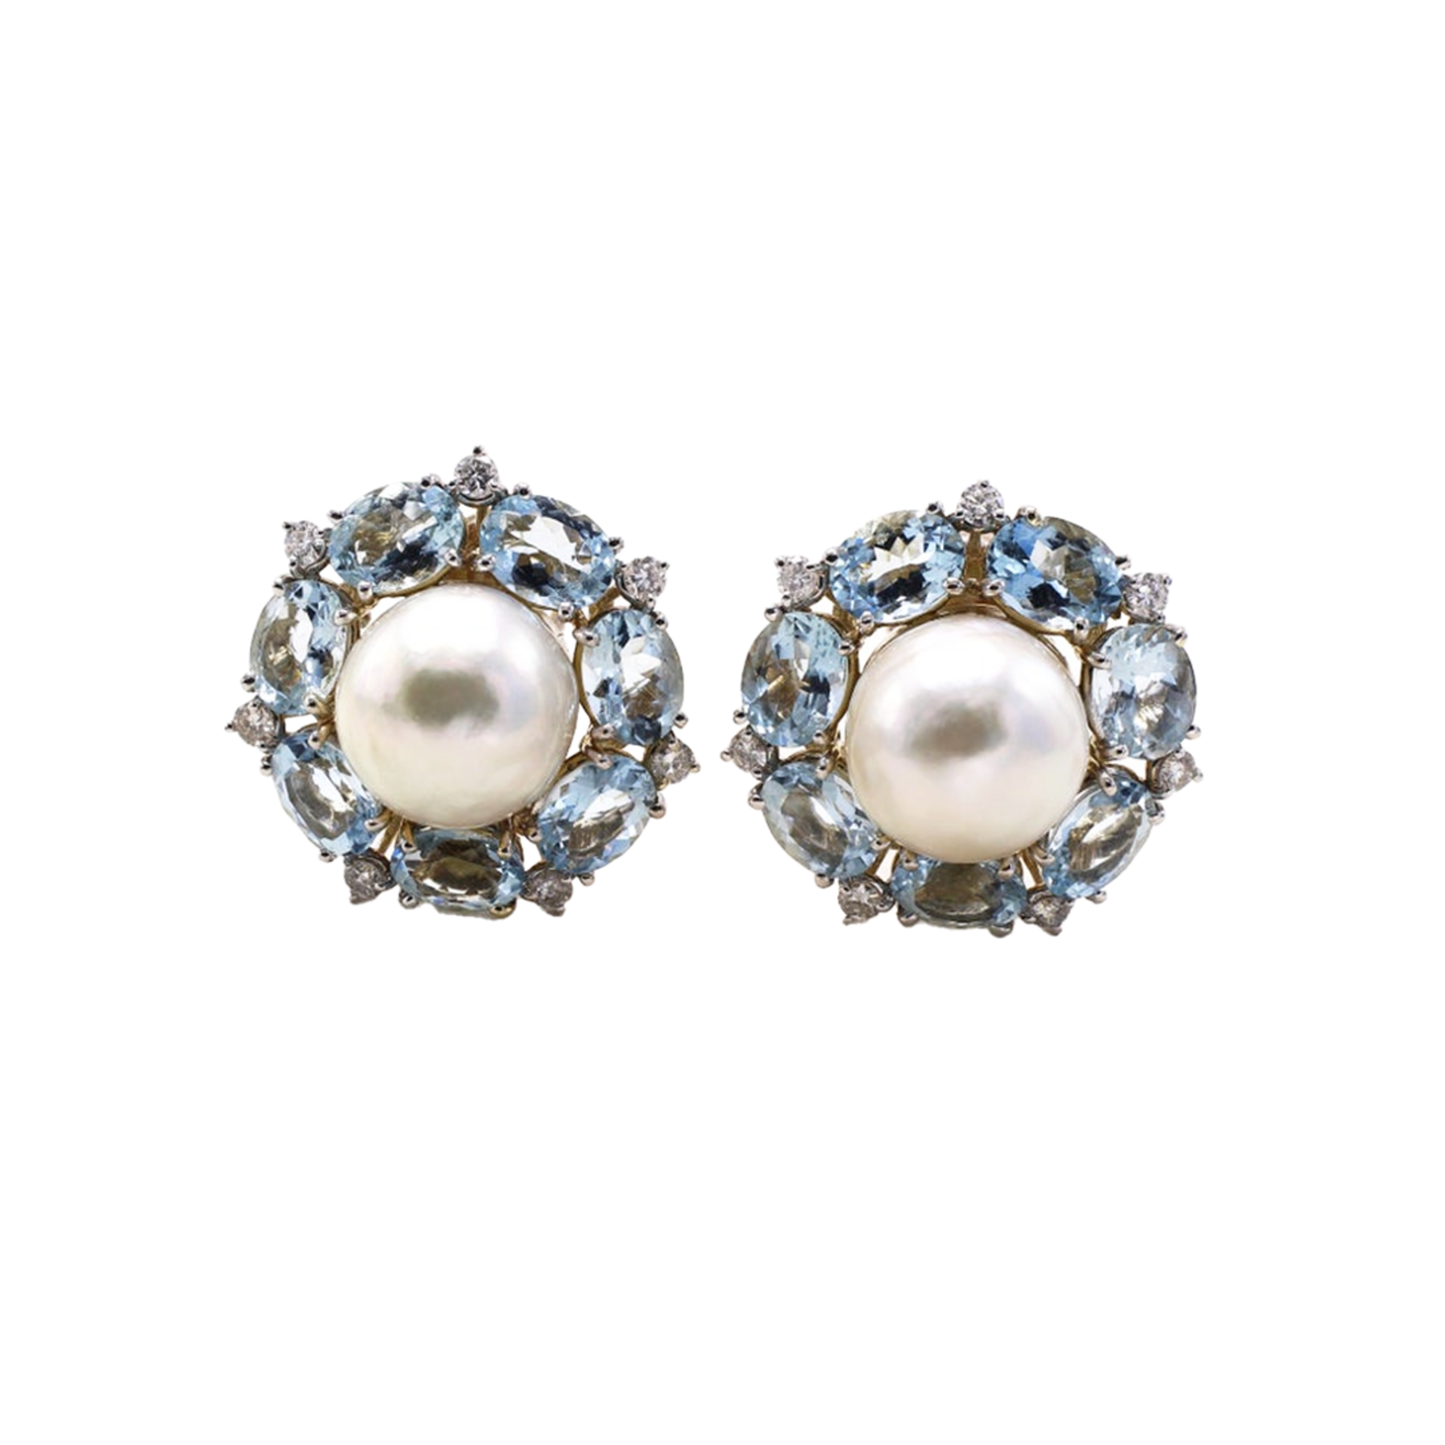 Seaman Schepps 1970s 18KT White Gold Aquamarine & Cultured Pearl Earrings front